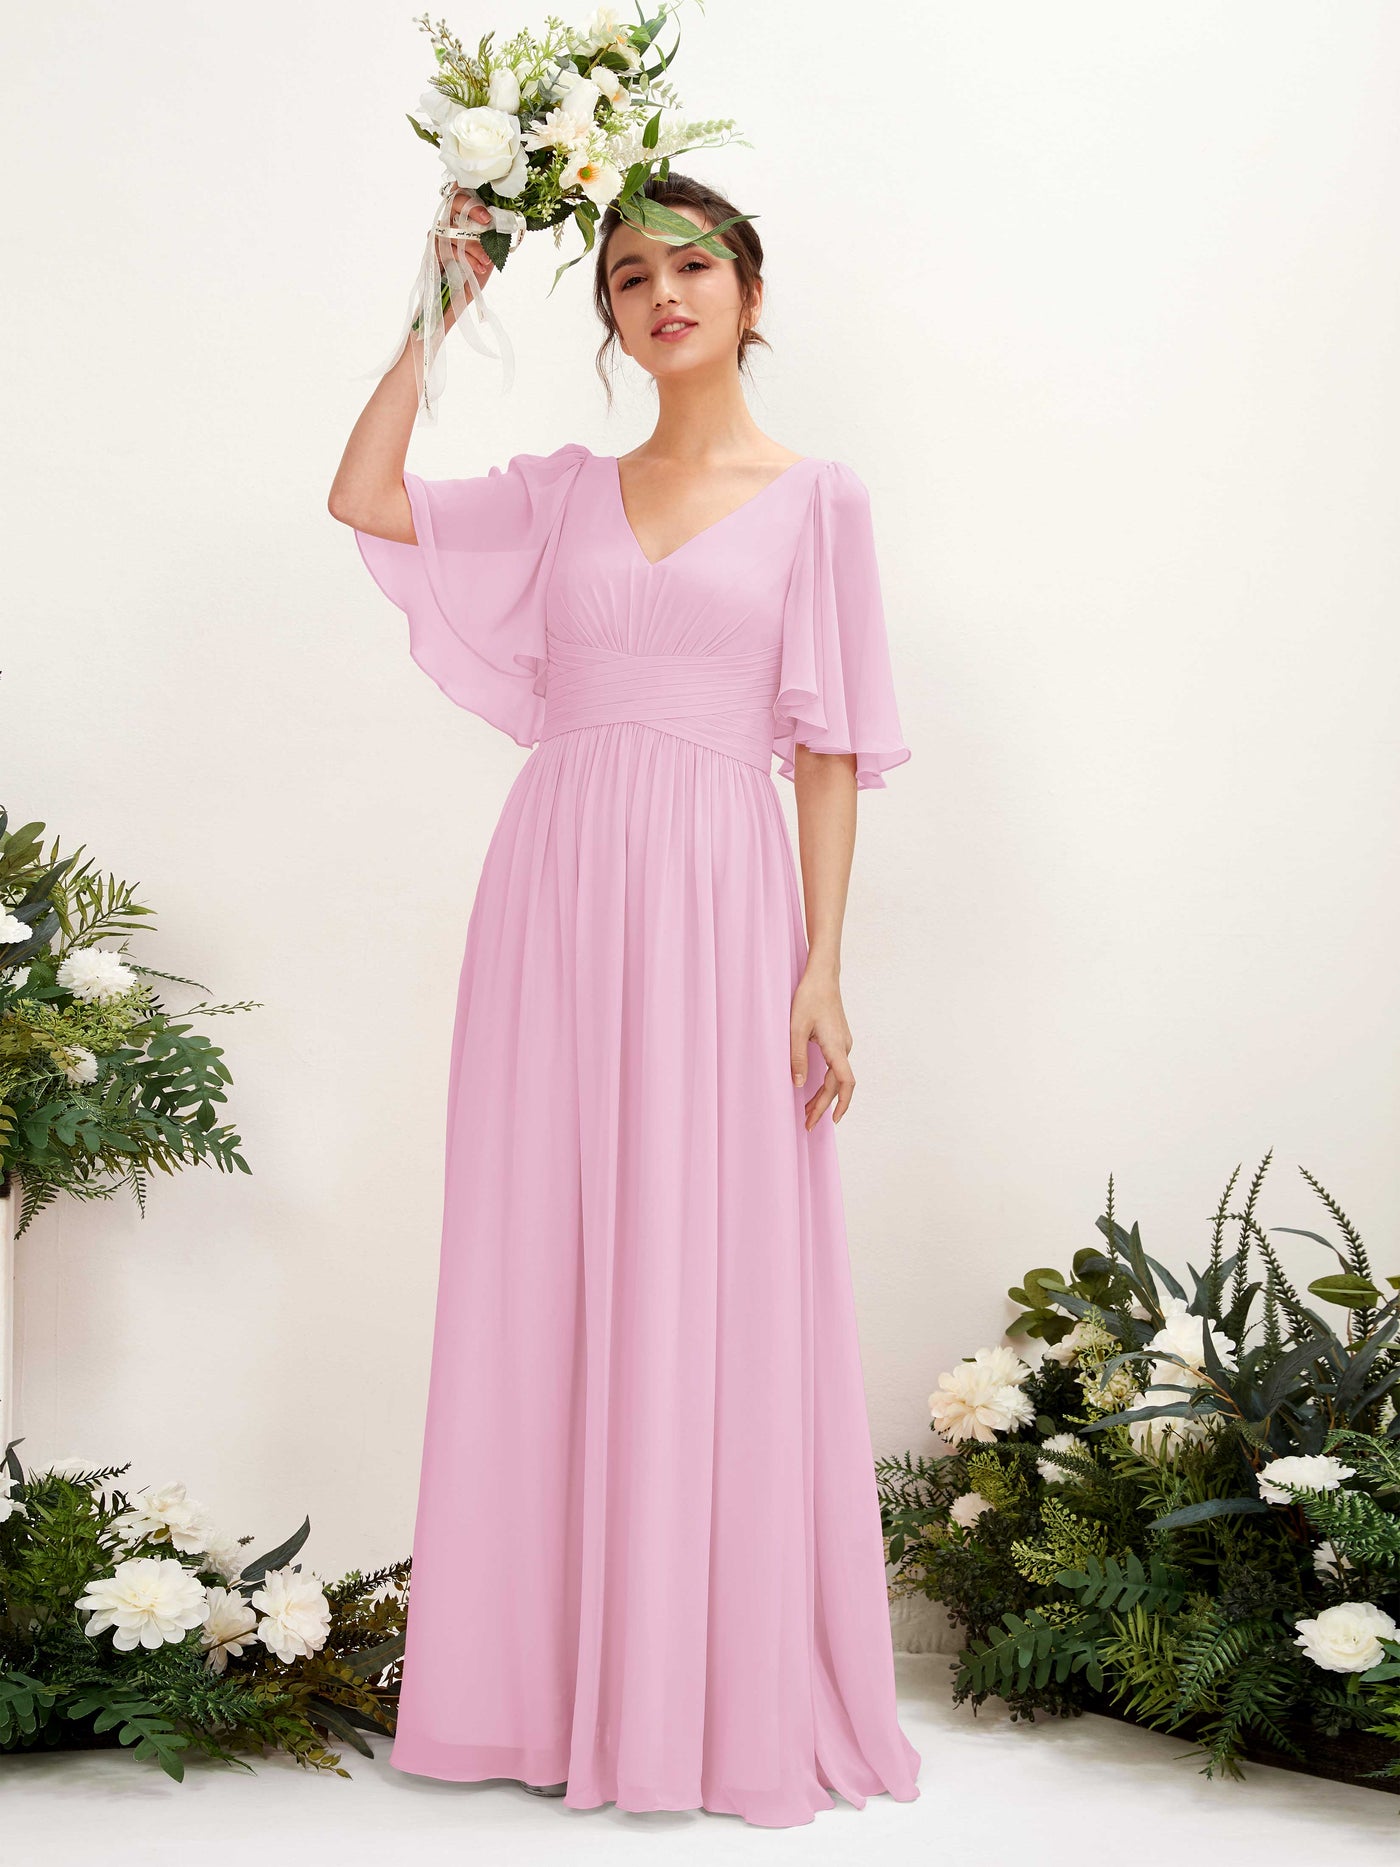 Candy Pink Bridesmaid Dresses Bridesmaid Dress A-line Chiffon V-neck Full Length 1/2 Sleeves Wedding Party Dress (81221639)#color_candy-pink